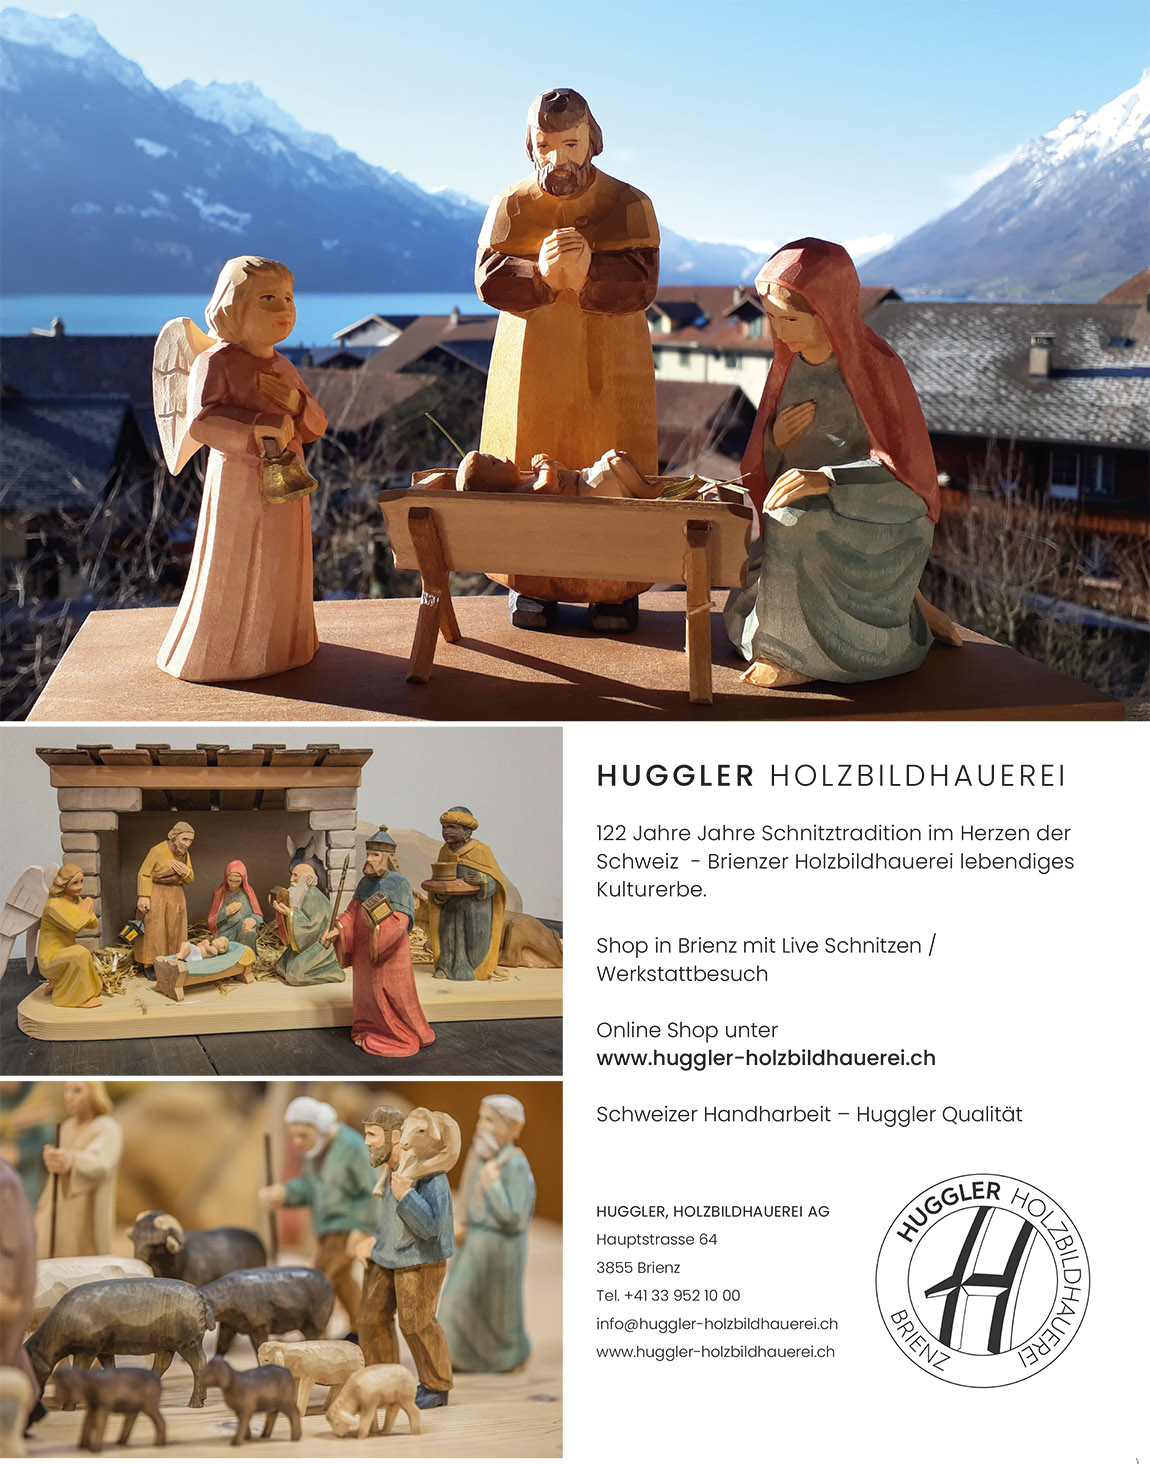 Huggler Holzbildhauerei: SWISS WOOD CARVING BETWEEN TRADITION AND FUTURE